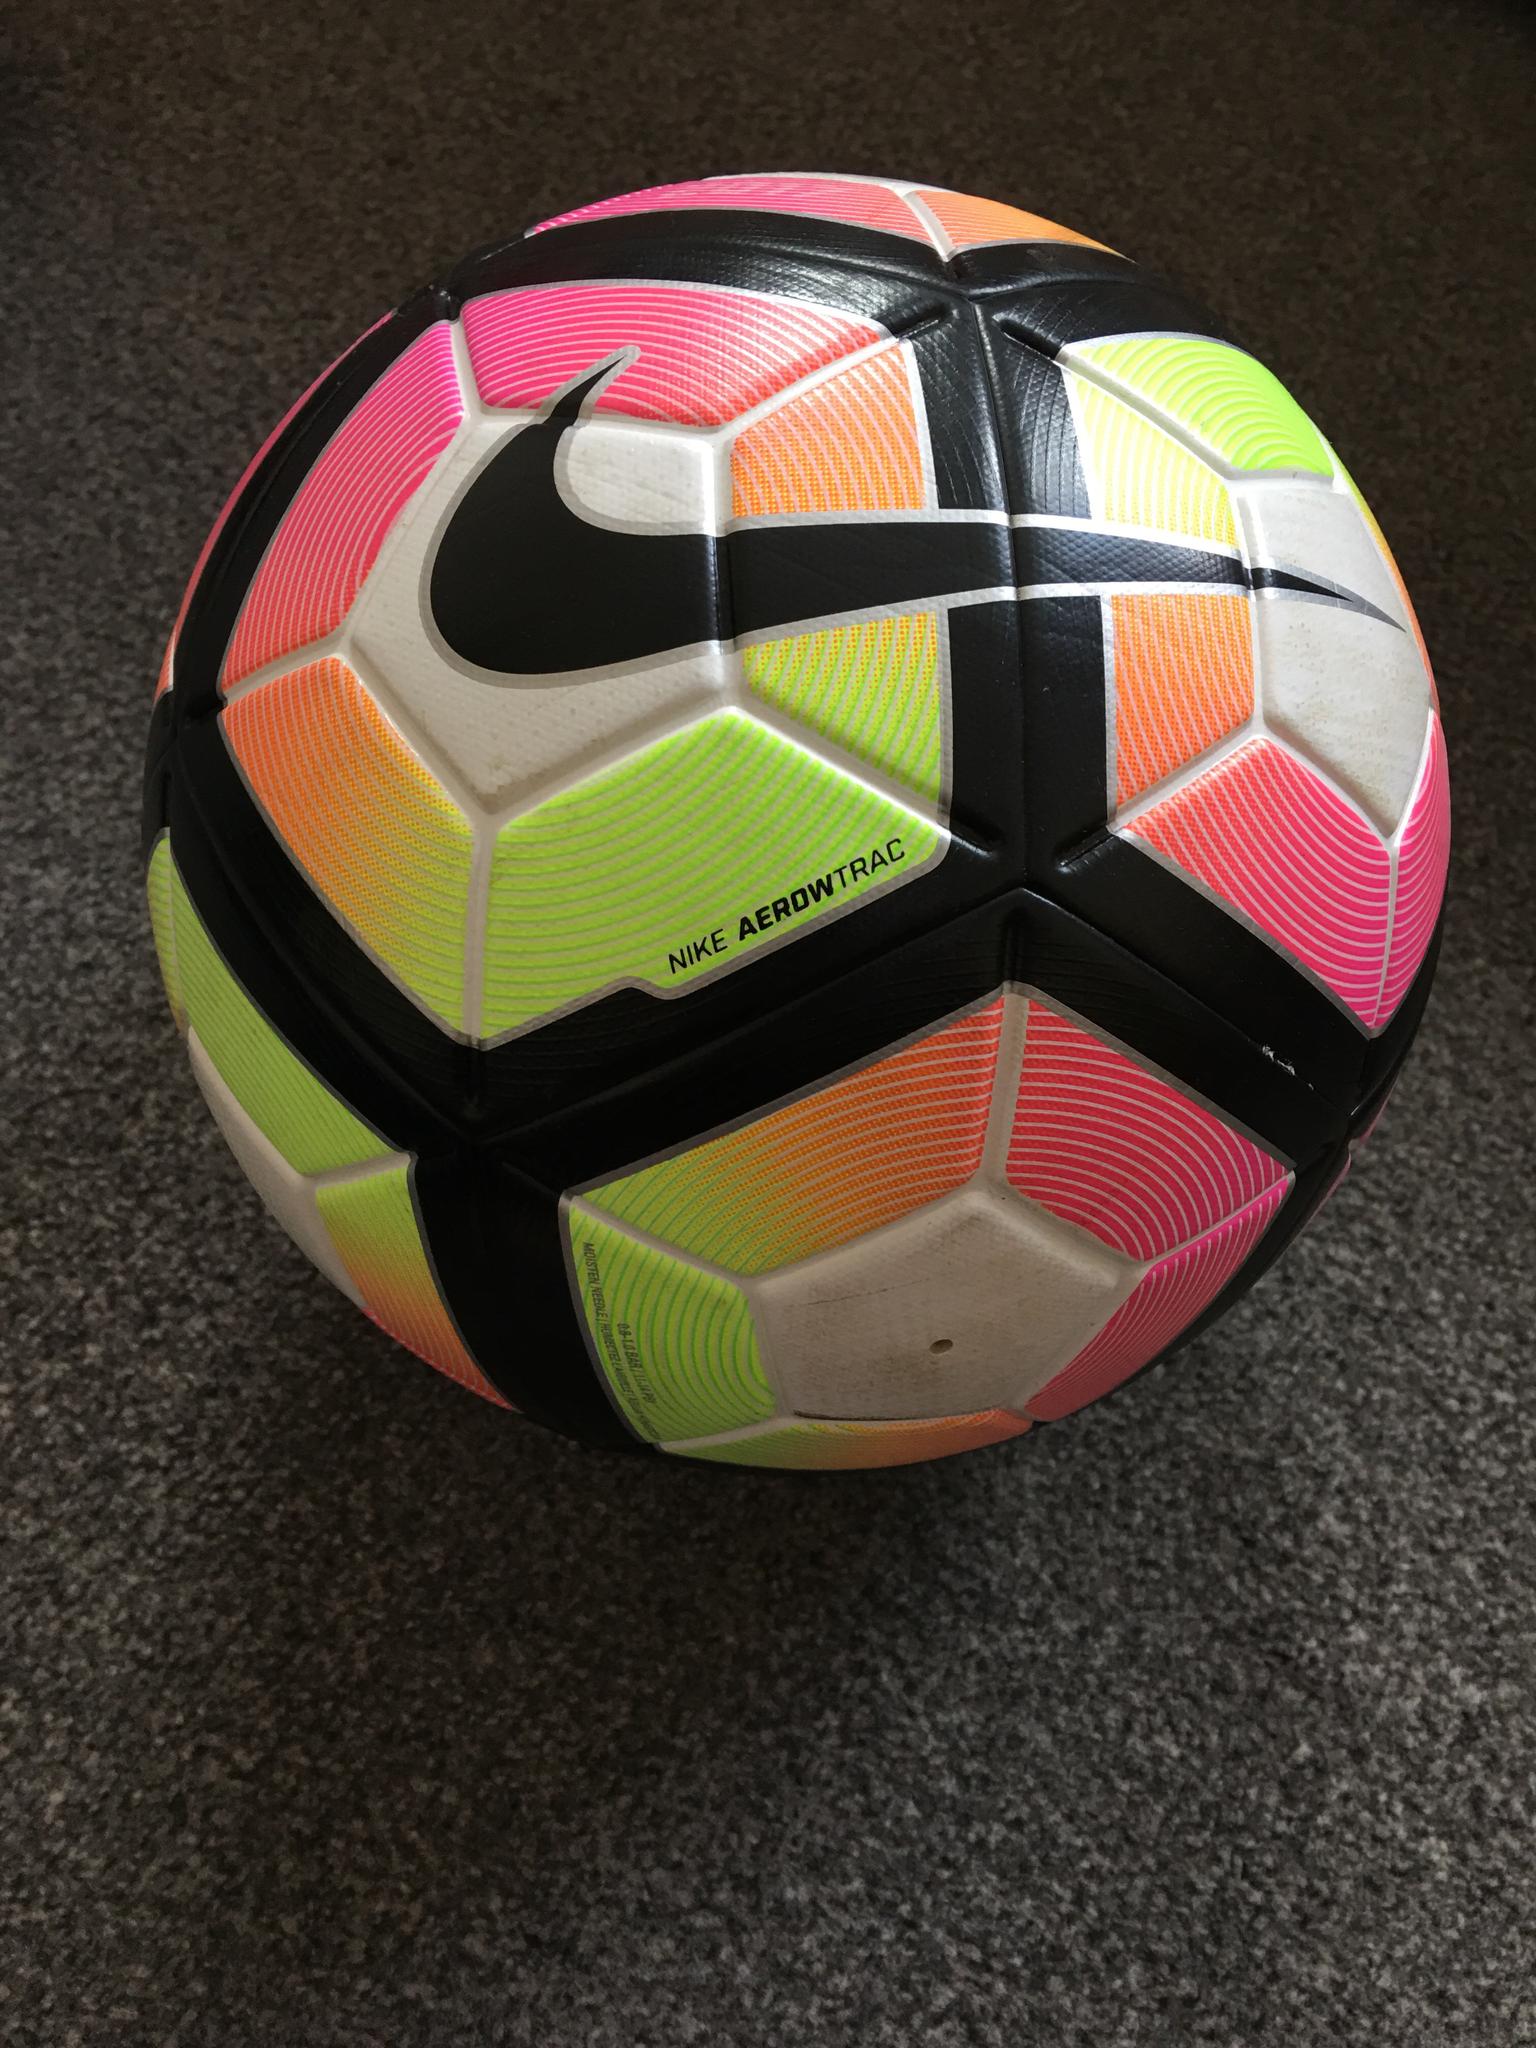 Nike FIFA Quality Pro Ordem 4 Official in E7 London for £25.00 for sale |  Shpock